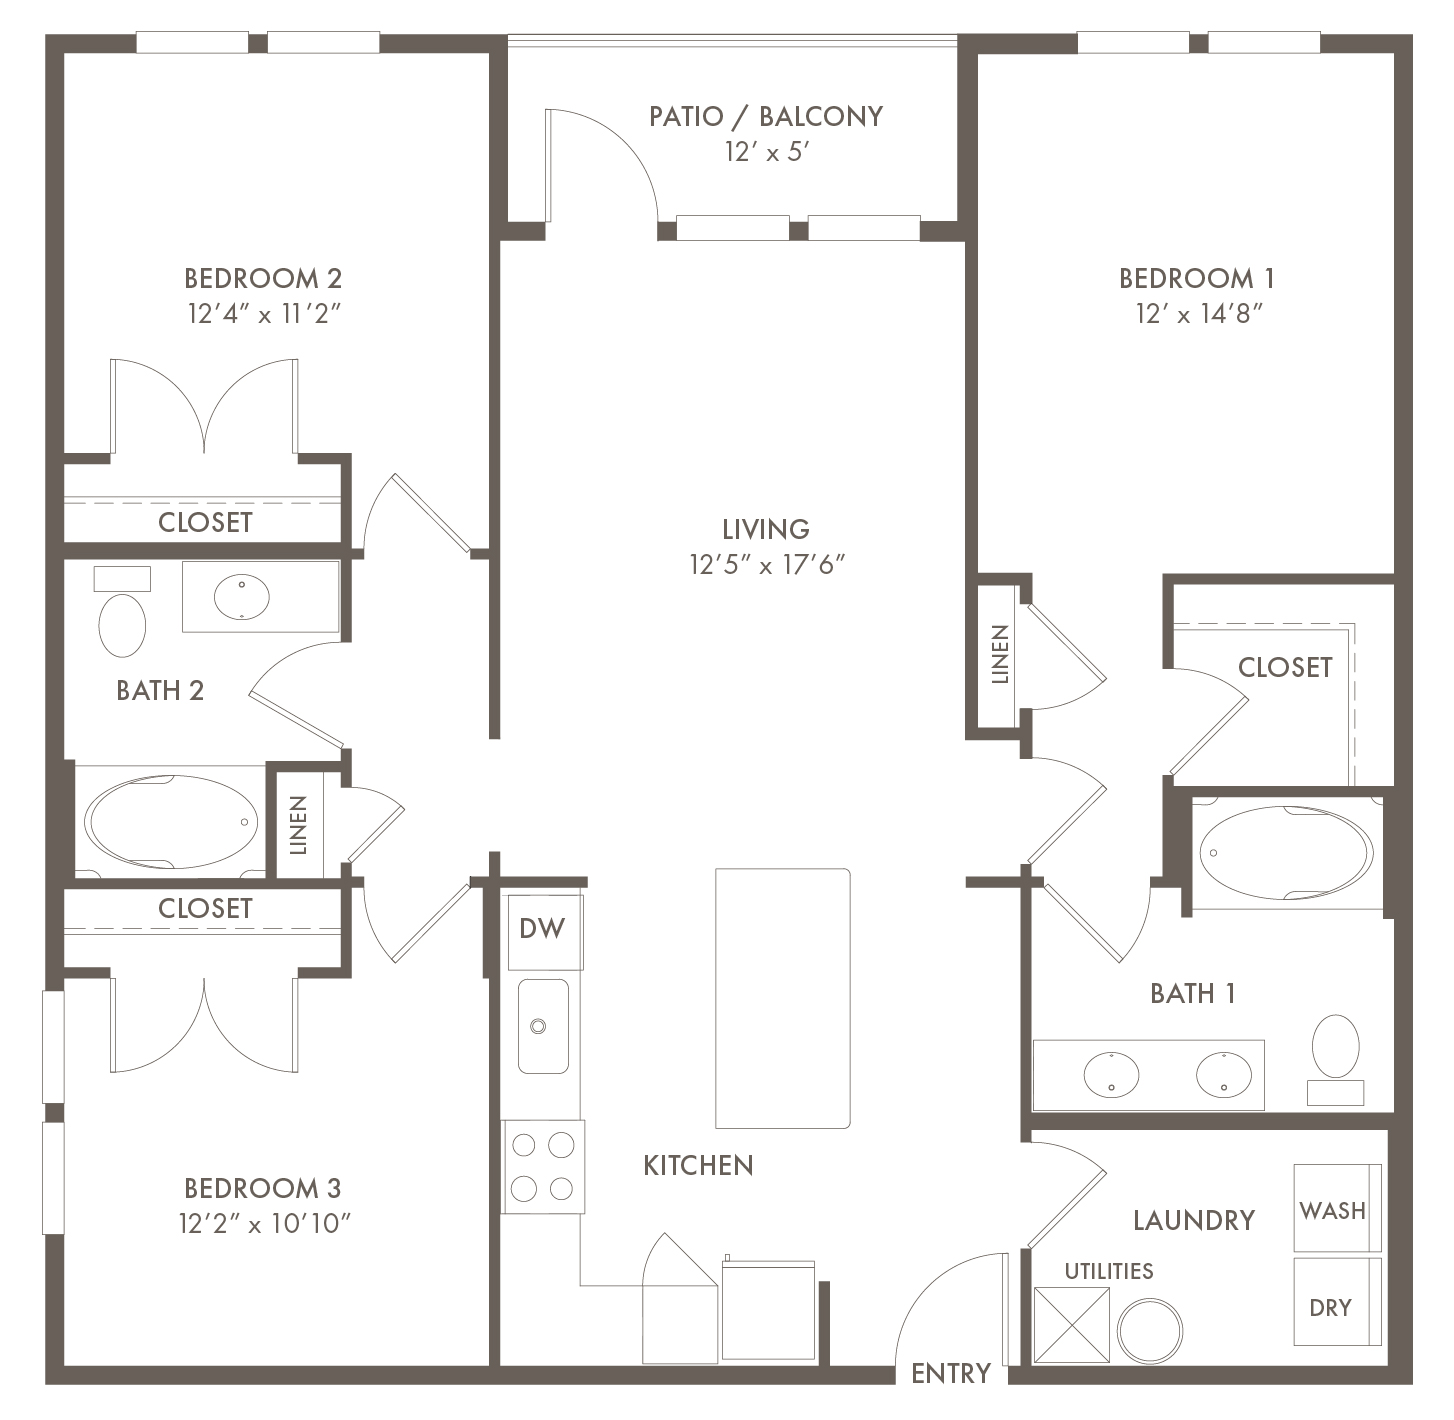 A C1 unit with 3 Bedrooms and 2 Bathrooms with area of 1248 sq. ft